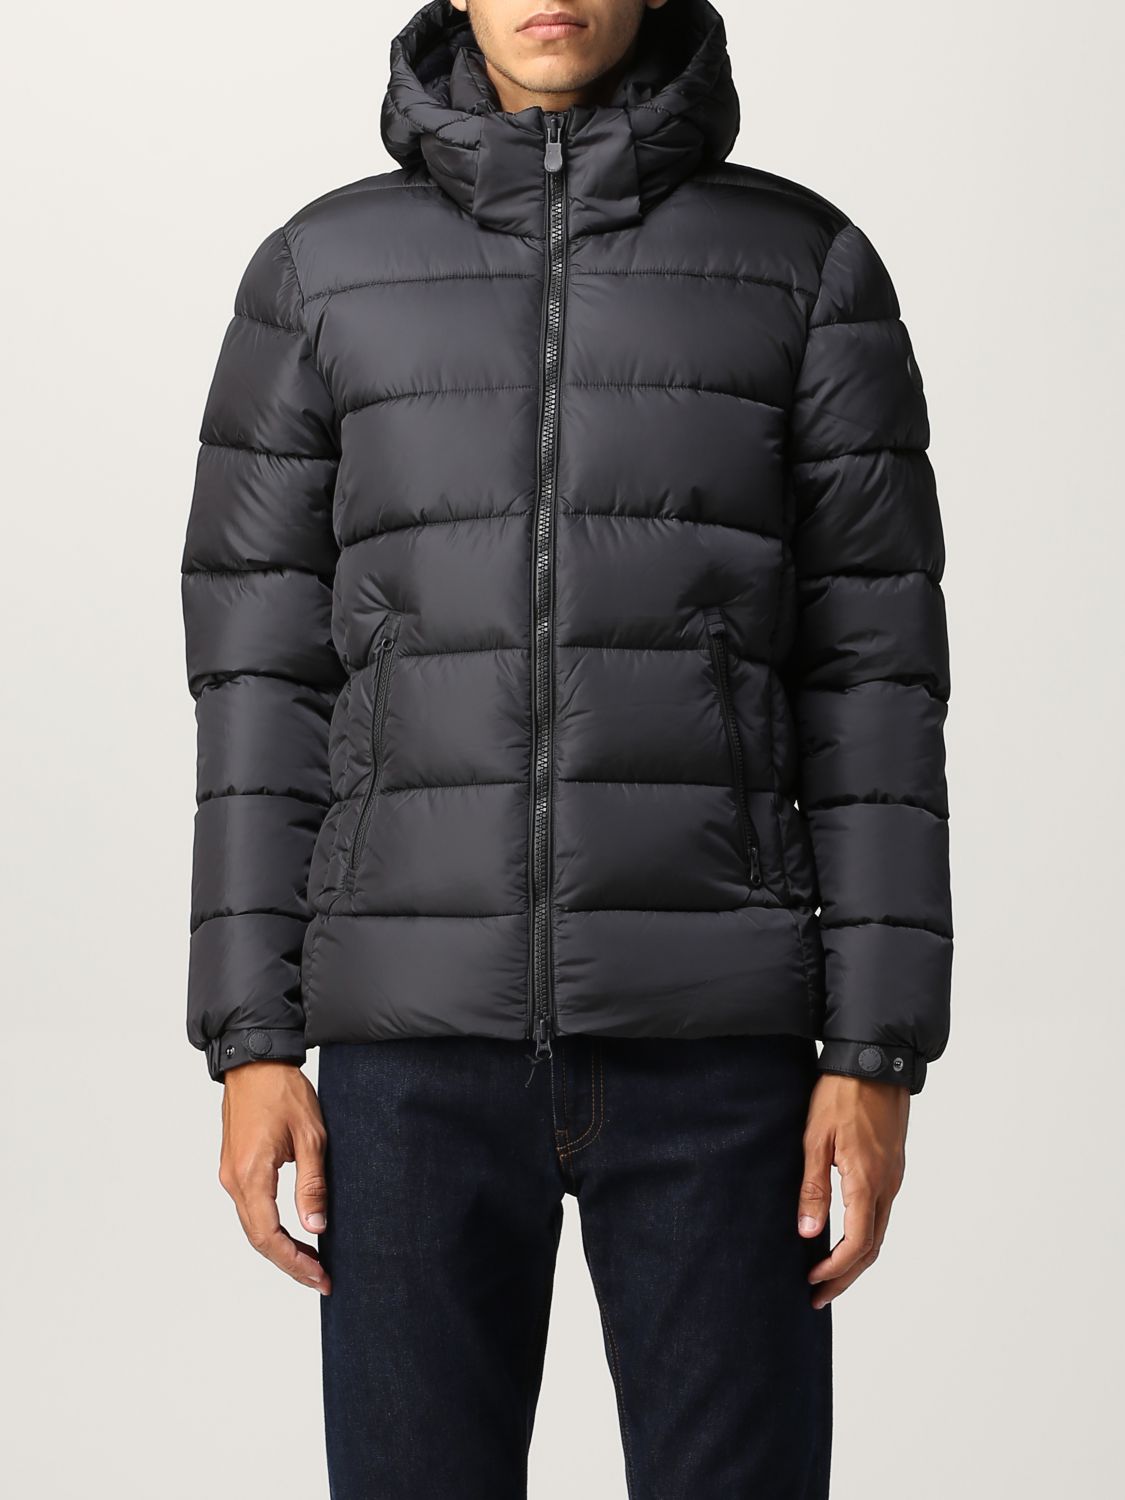 Jacket Save The Duck: Save The Duck jacket for man charcoal 1